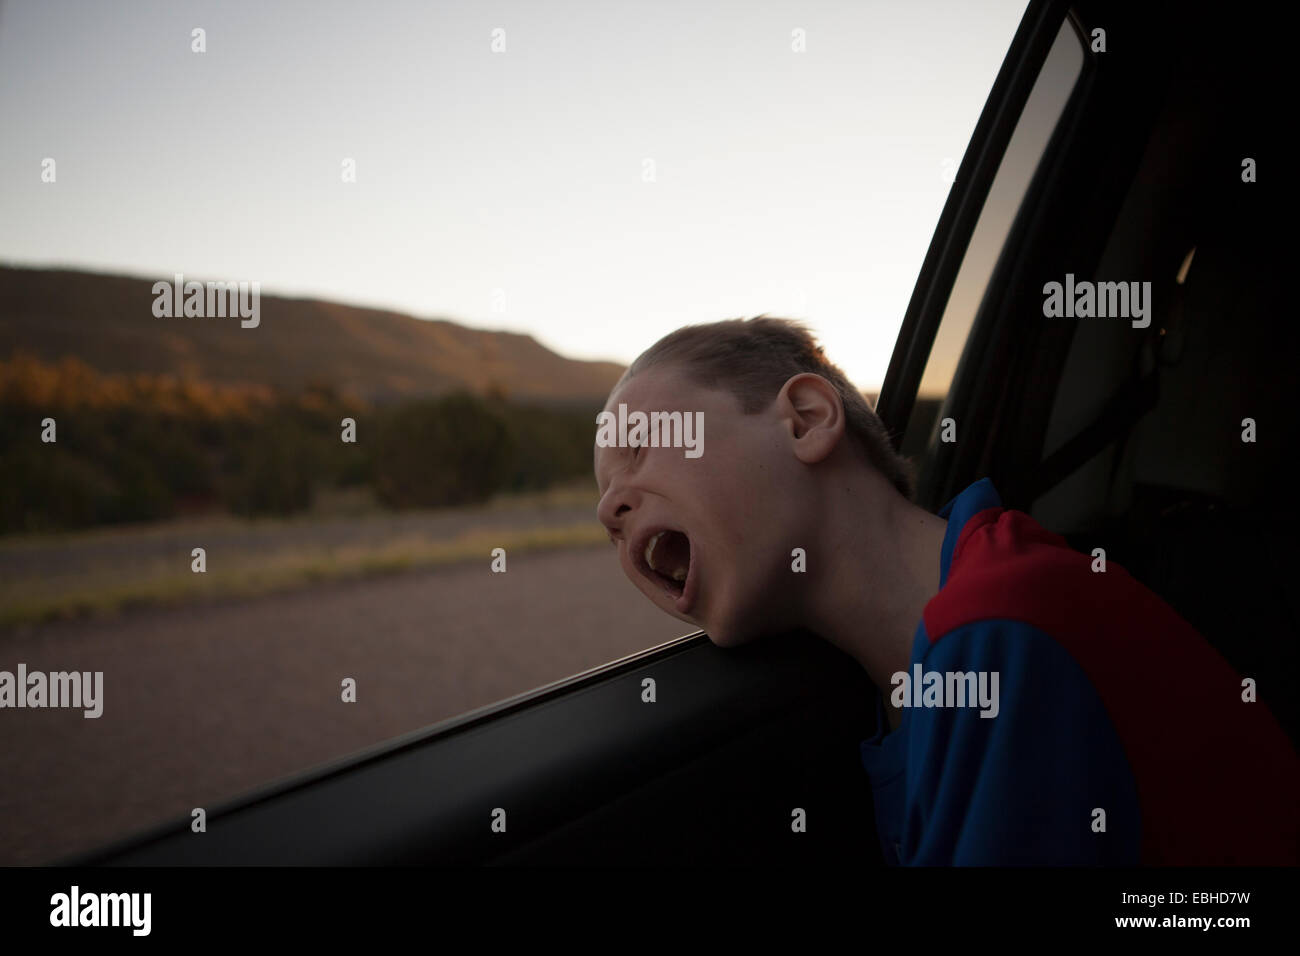 Boy leaning out of car window with eyes closed and mouth open Stock Photo